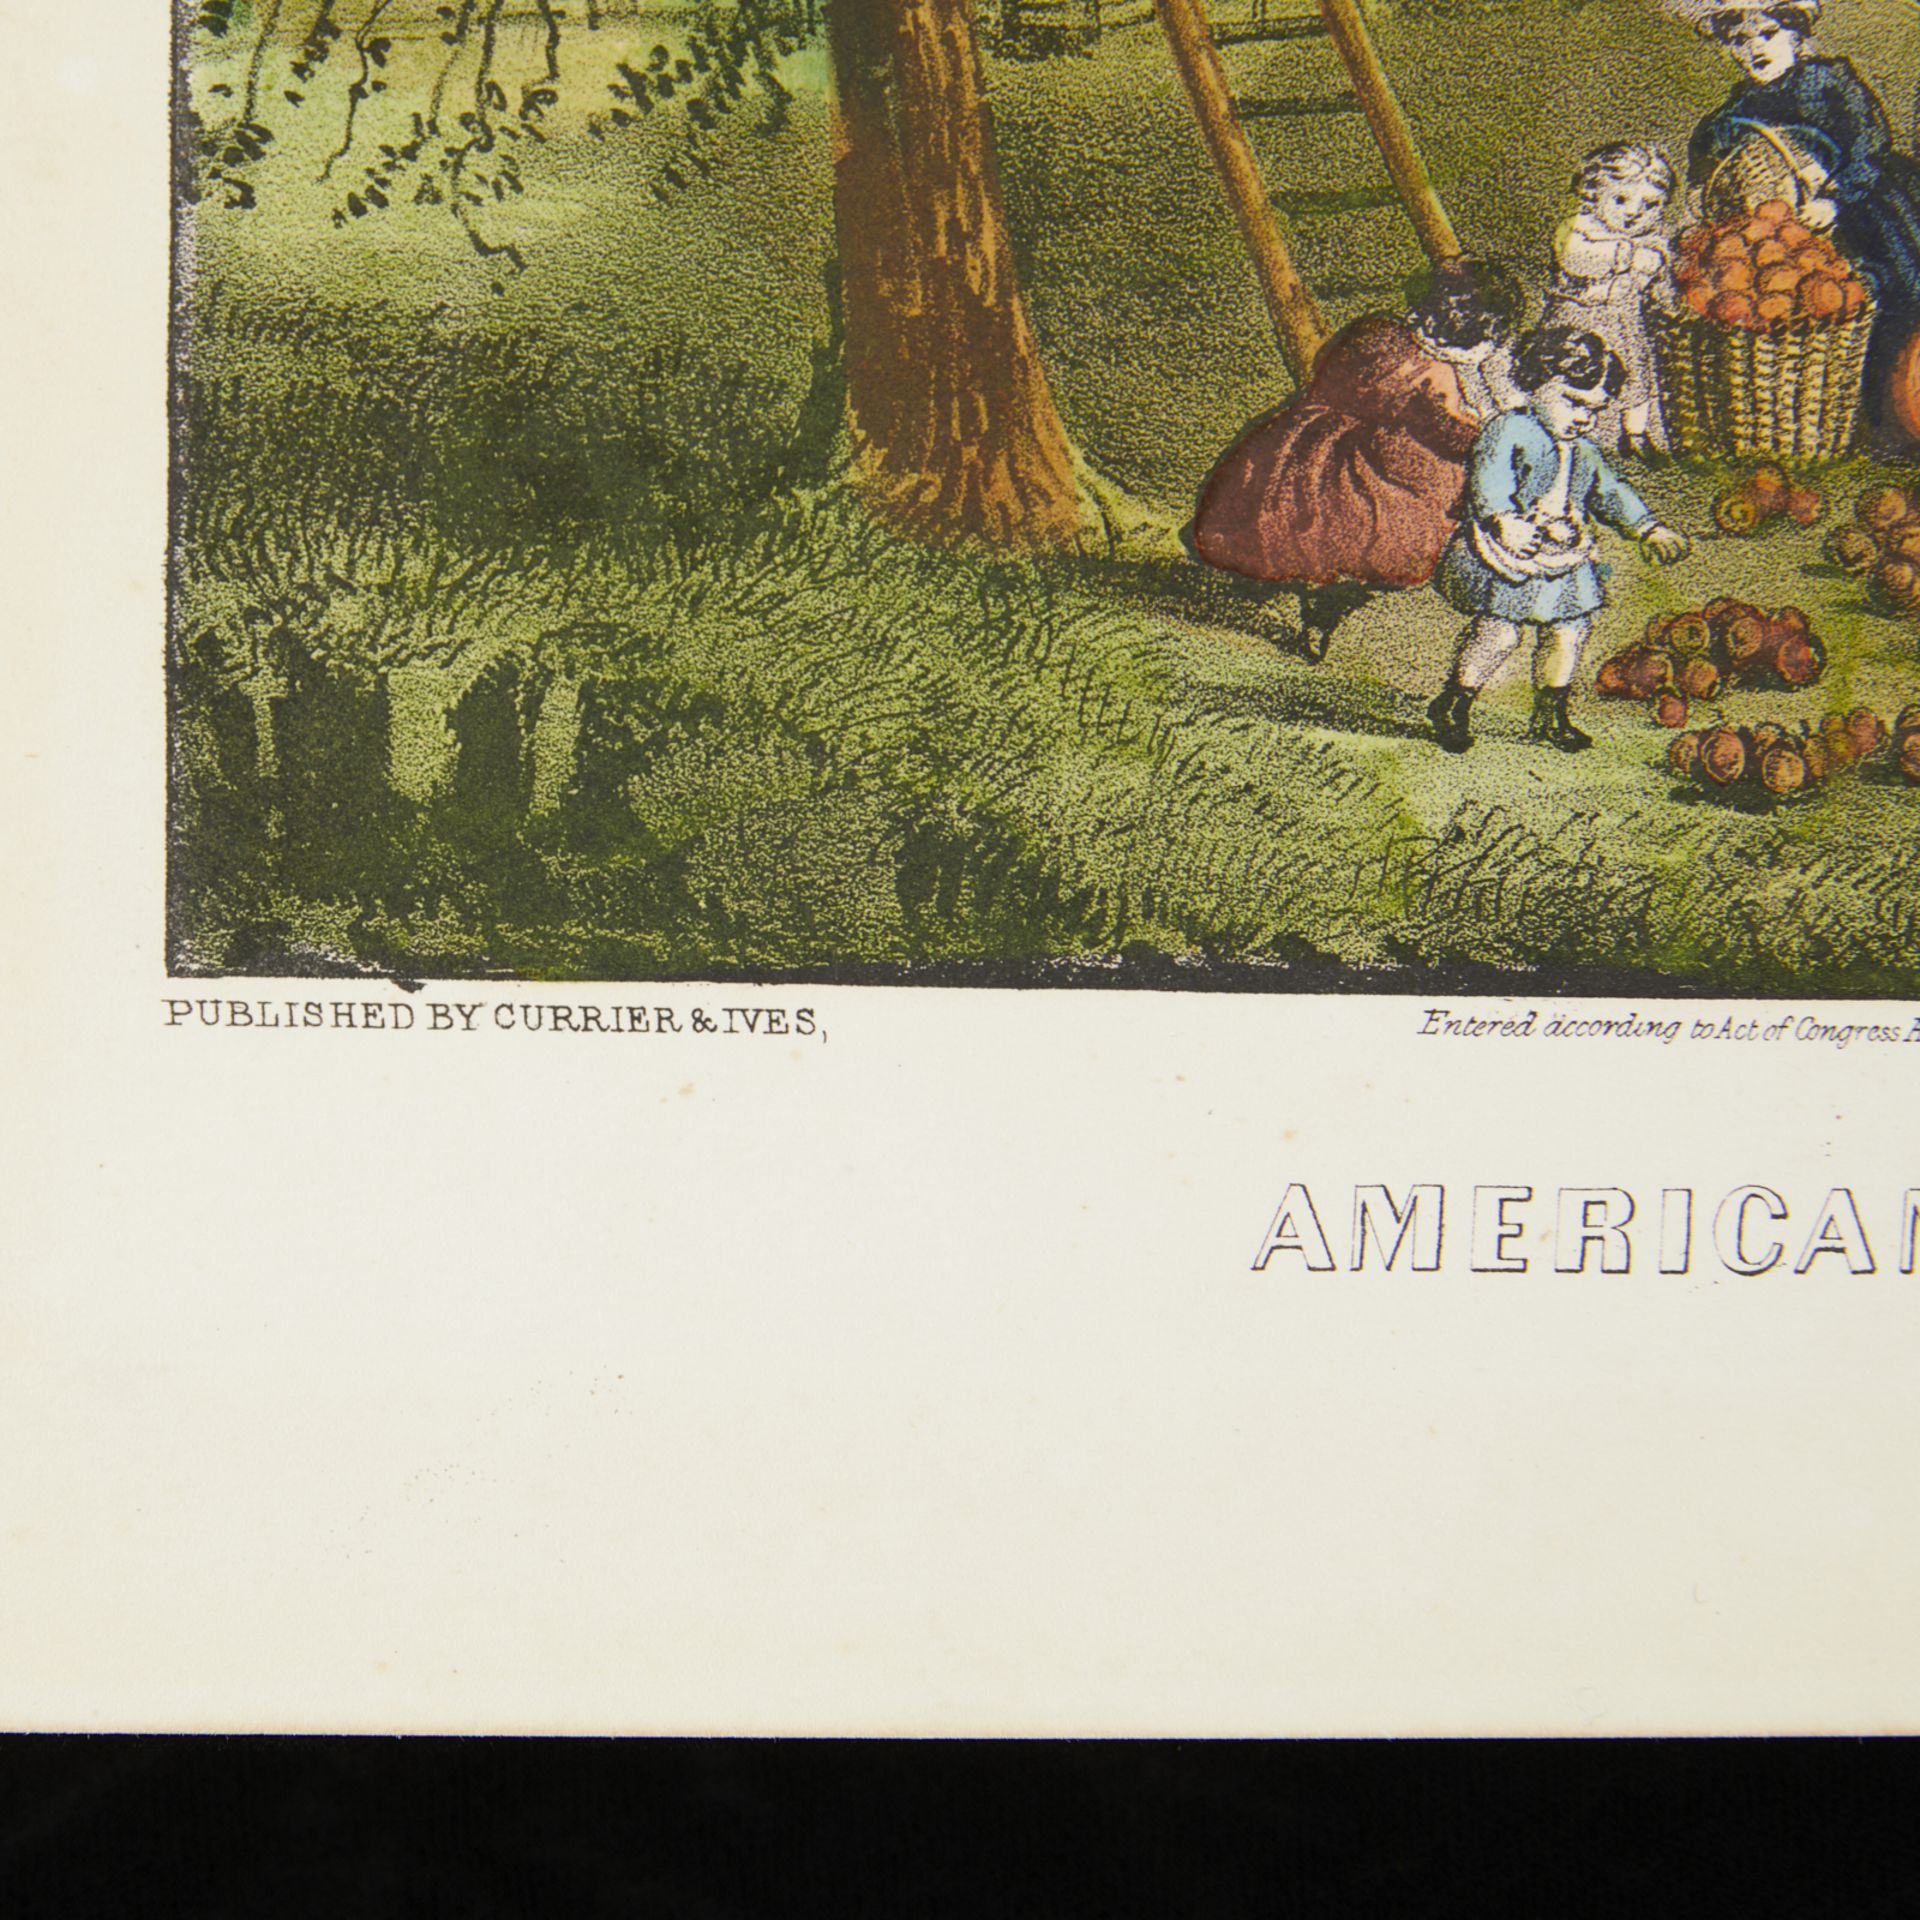 Currier & Ives "American Homestead Autumn" 1869 - Image 4 of 8